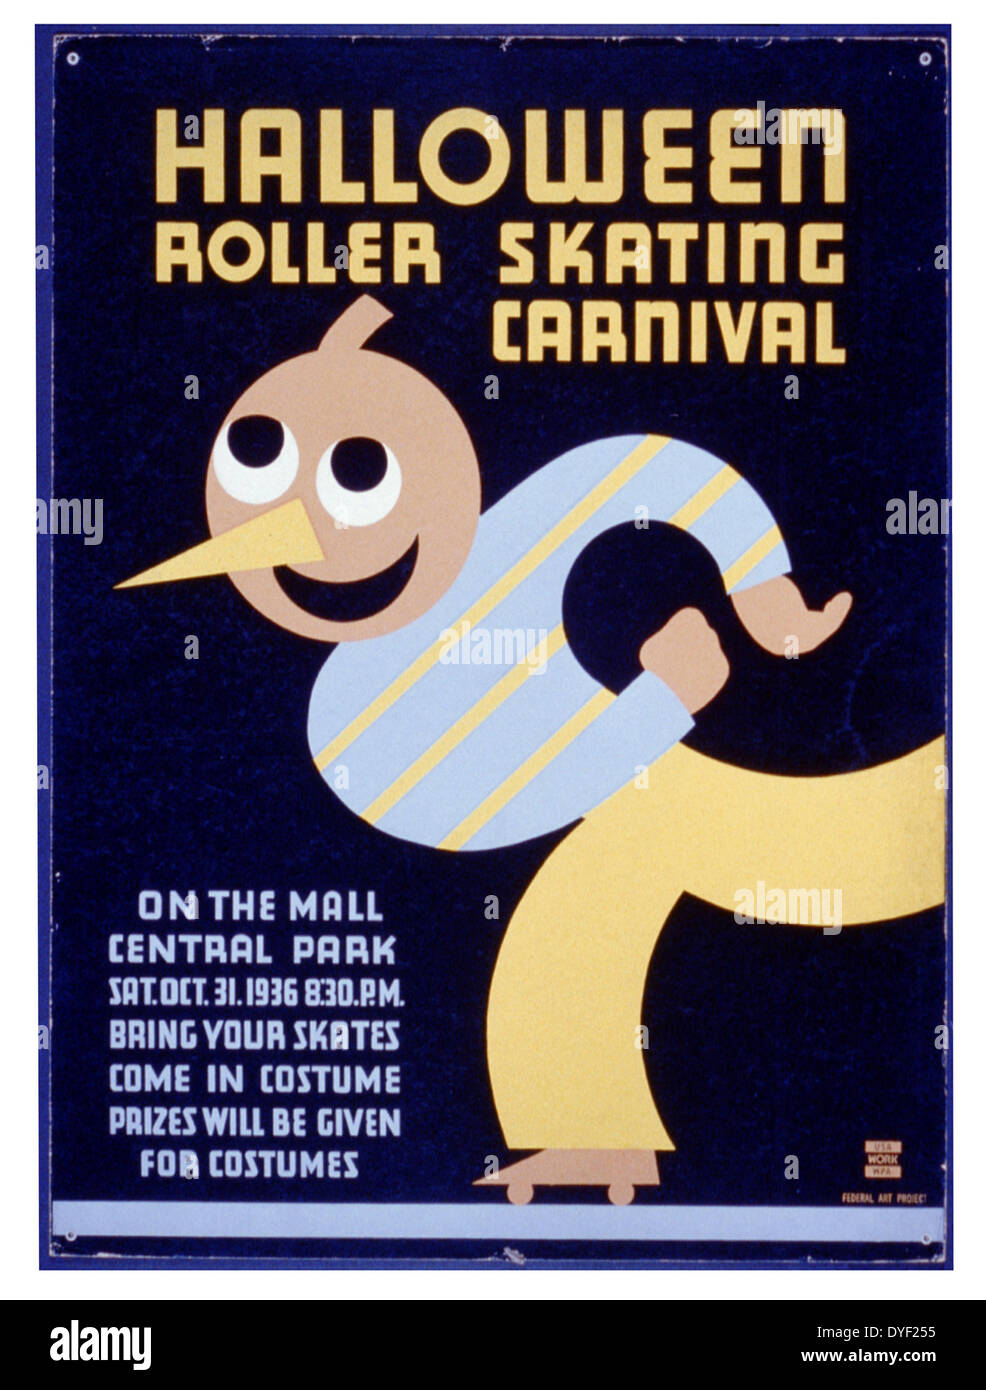 Halloween roller skating carnival On the mall, Central Park New York. Bring your skates: Come in costume: Prizes will be given for costumes. Federal Art Project poster 1936. Poster announcing roller skating carnival in Central Park, New York City, showing Stock Photo